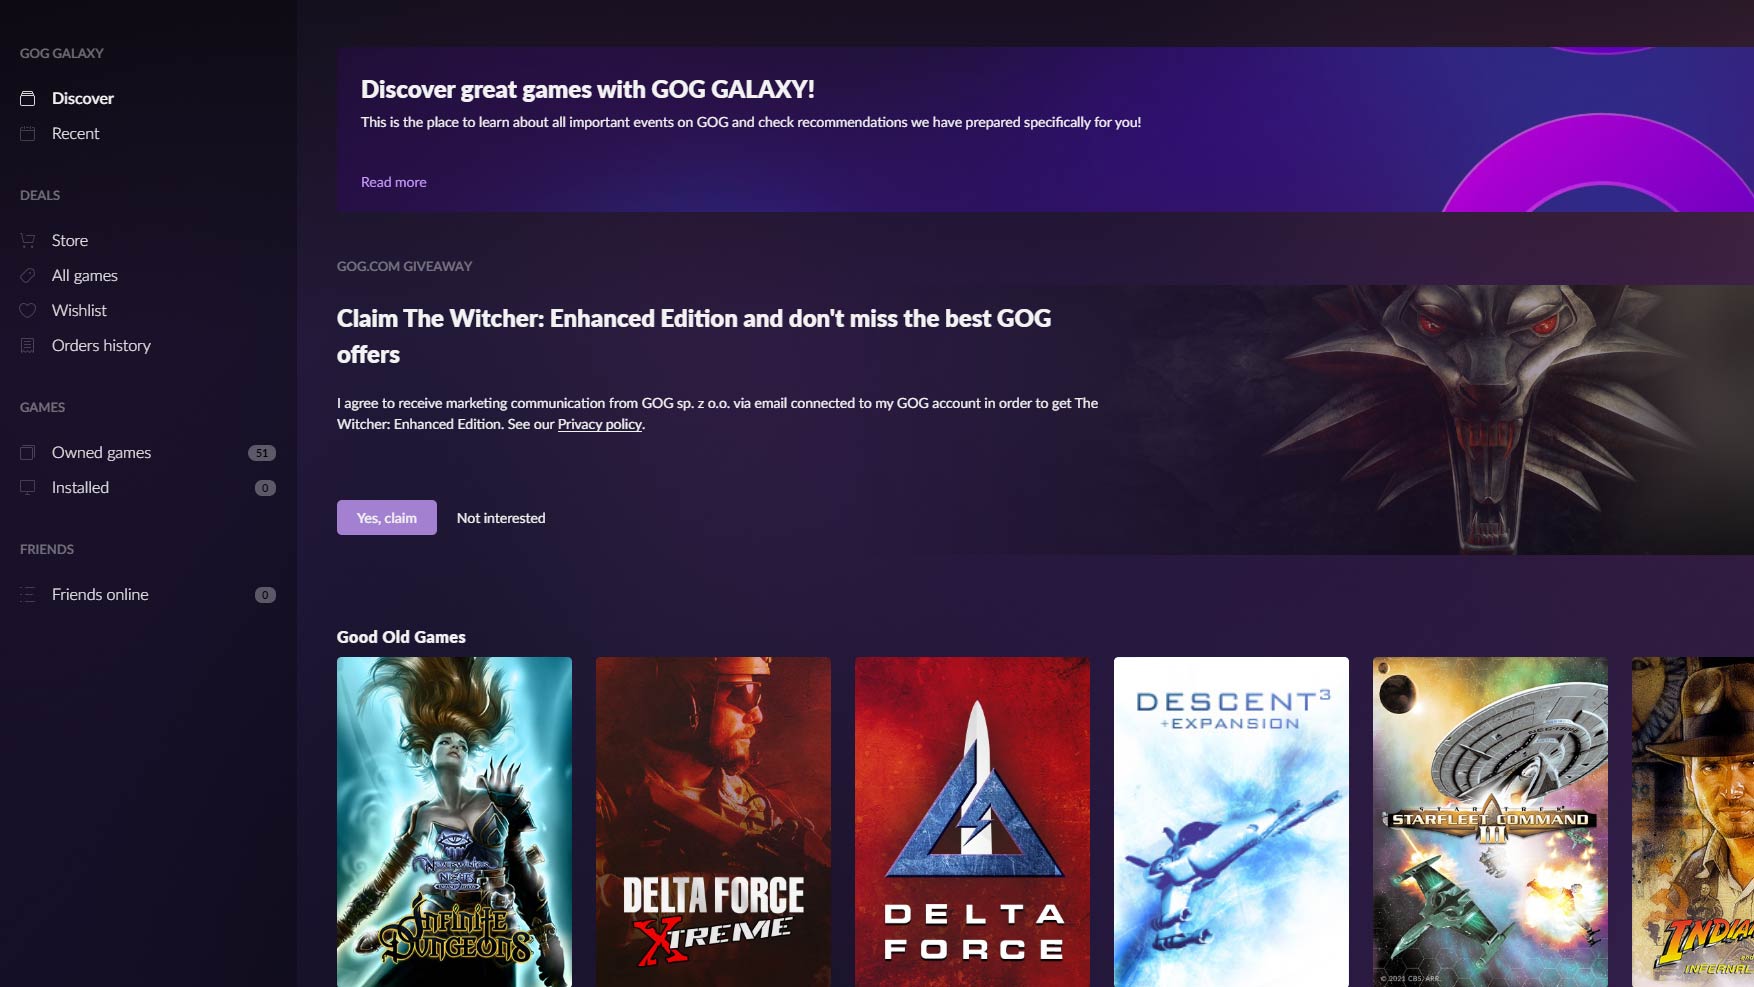 The Witcher Enhanced Edition is free on GOG Galaxy